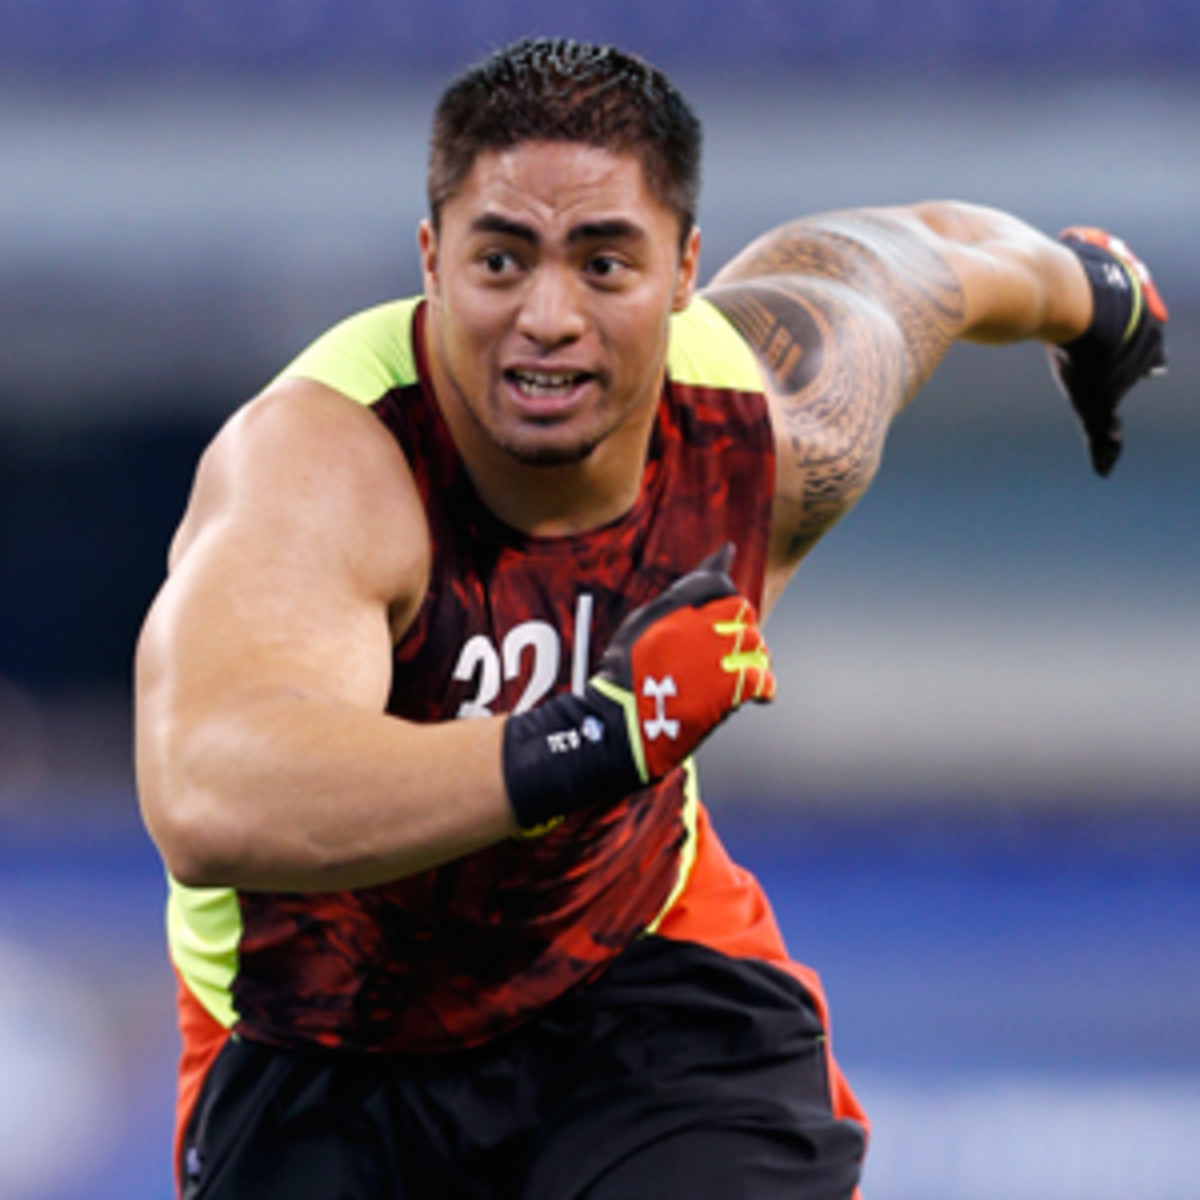 Manti Te'o has seen his NFL Draft stock fall after the BCS Championship Game and the scandal surrounding his fake girlfriend. (Joe Robbins/Getty Images)